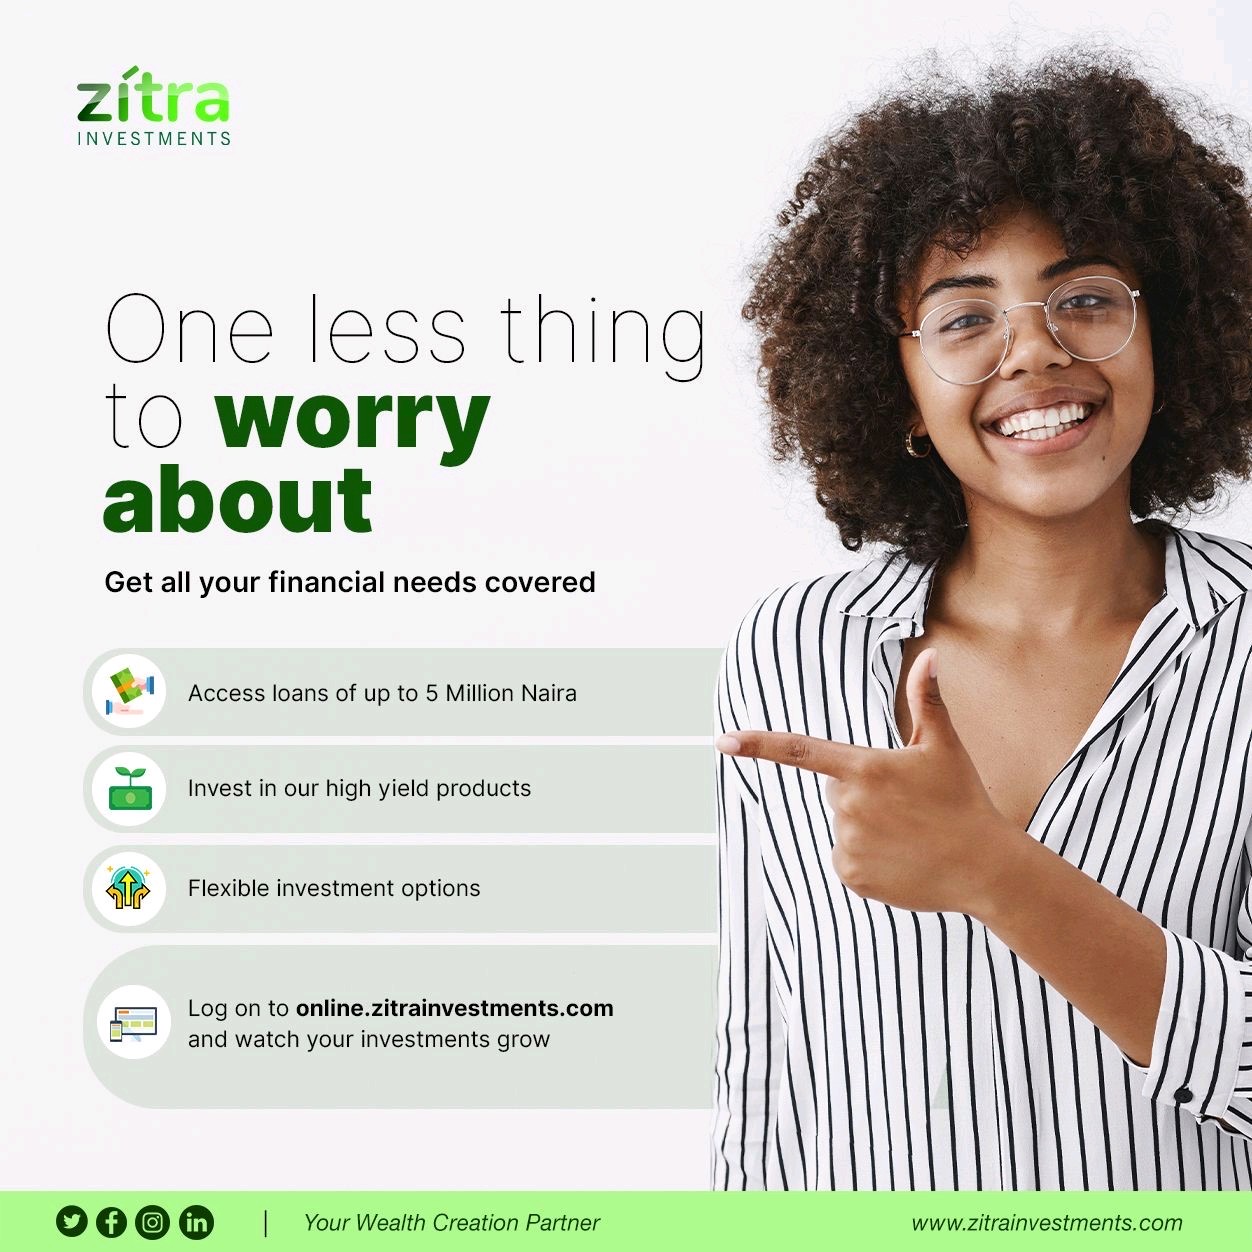 Zitra investment features